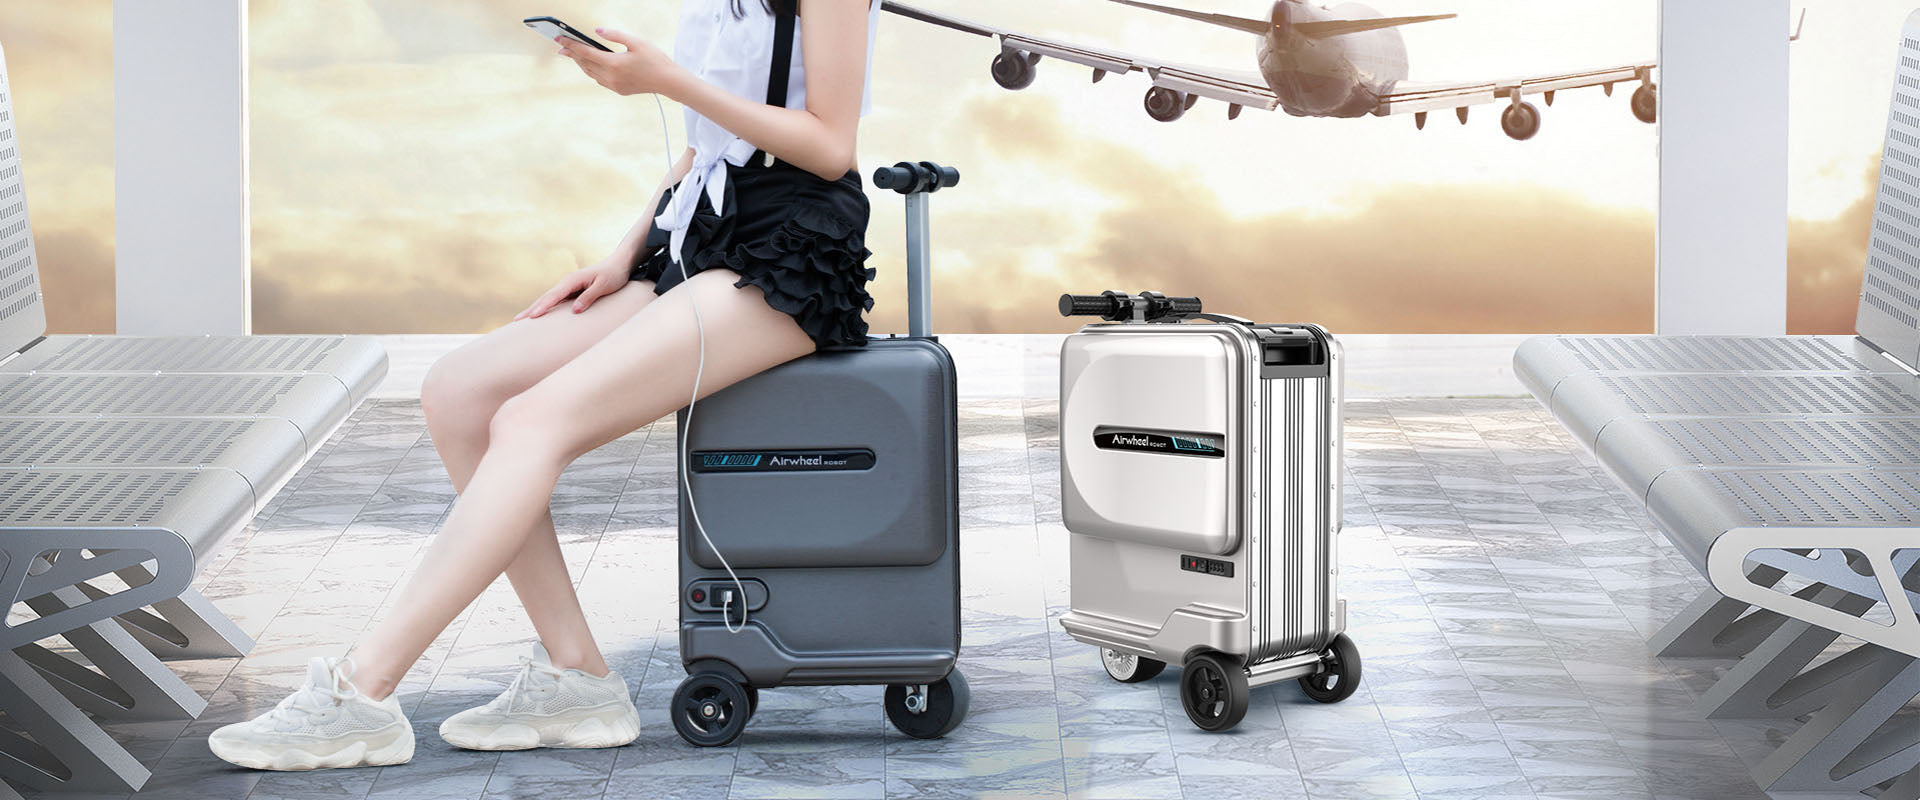 What is Airwheel luggage?